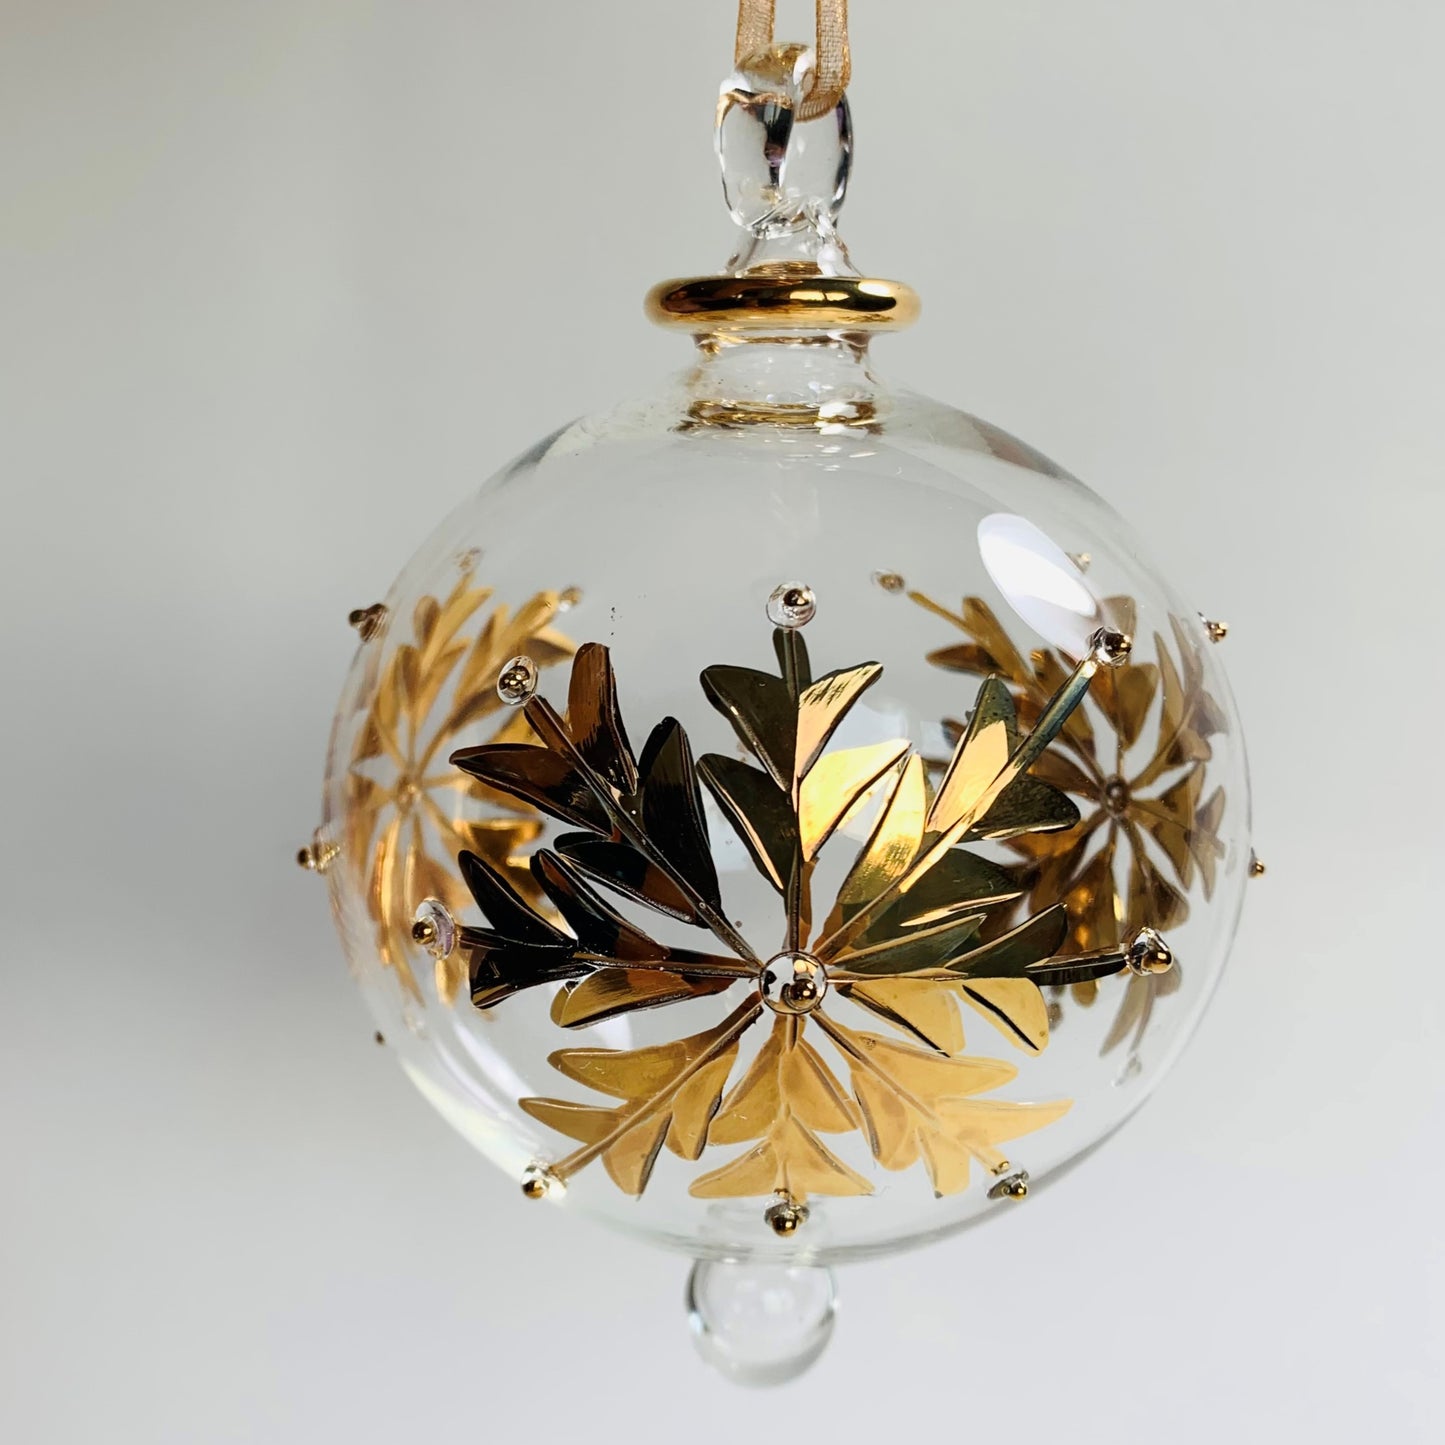 Ethically Sourced Blown Glass Ornament - Gold Snow Flake